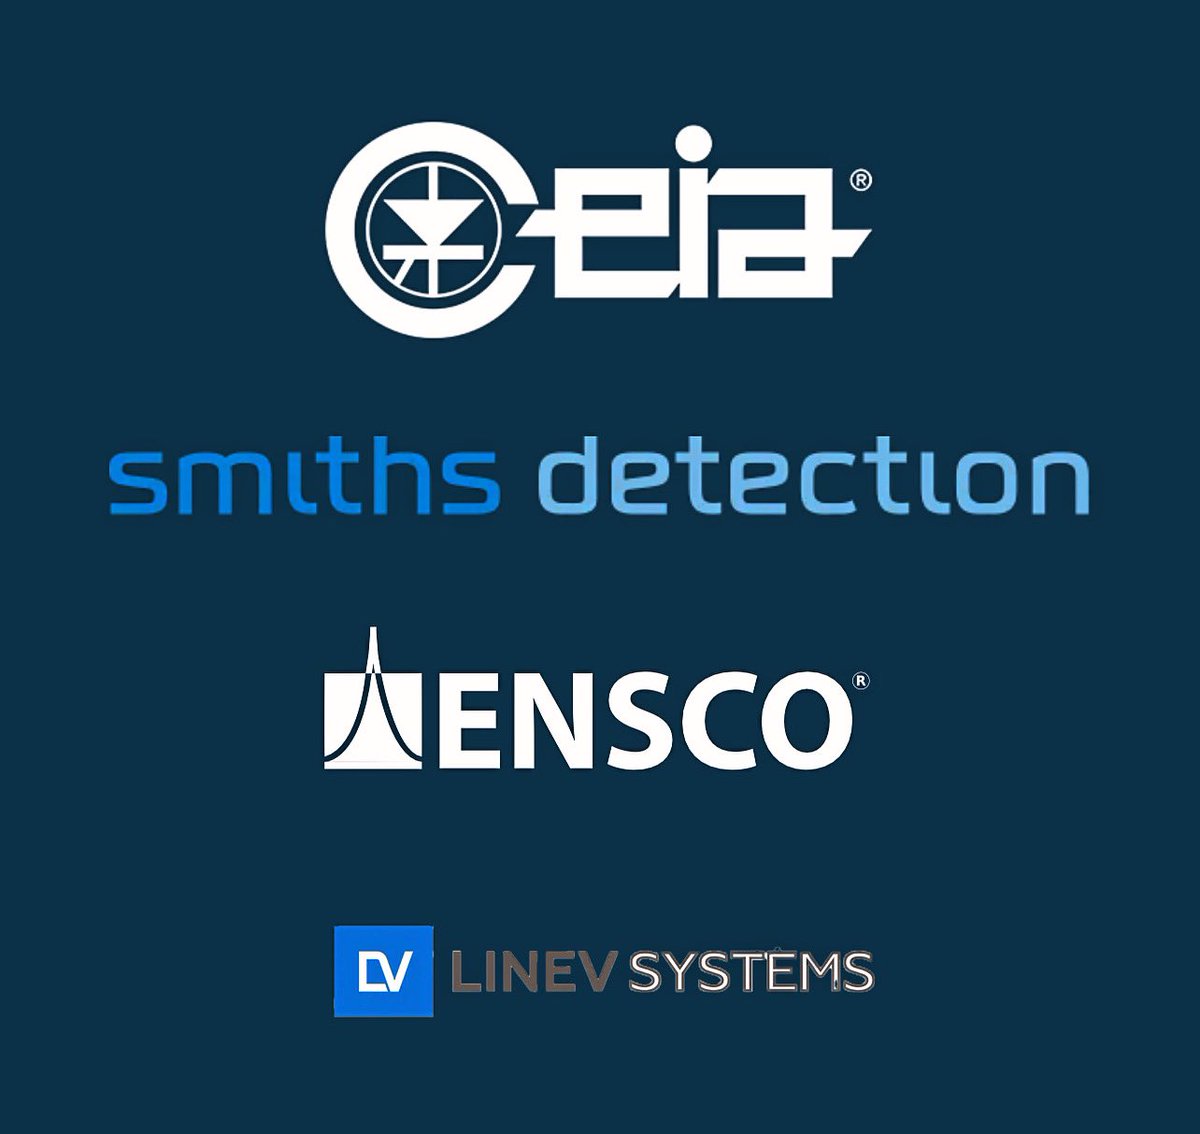 Point Security offers an extensive line of new and refurbished checkpoint security equipment from security experts like CEIA, Smith’s Detection, Ensco and LINEV Systems.

Learn more on our website today! pointsecurityinc.com

#securitycompany #security #securityequipment